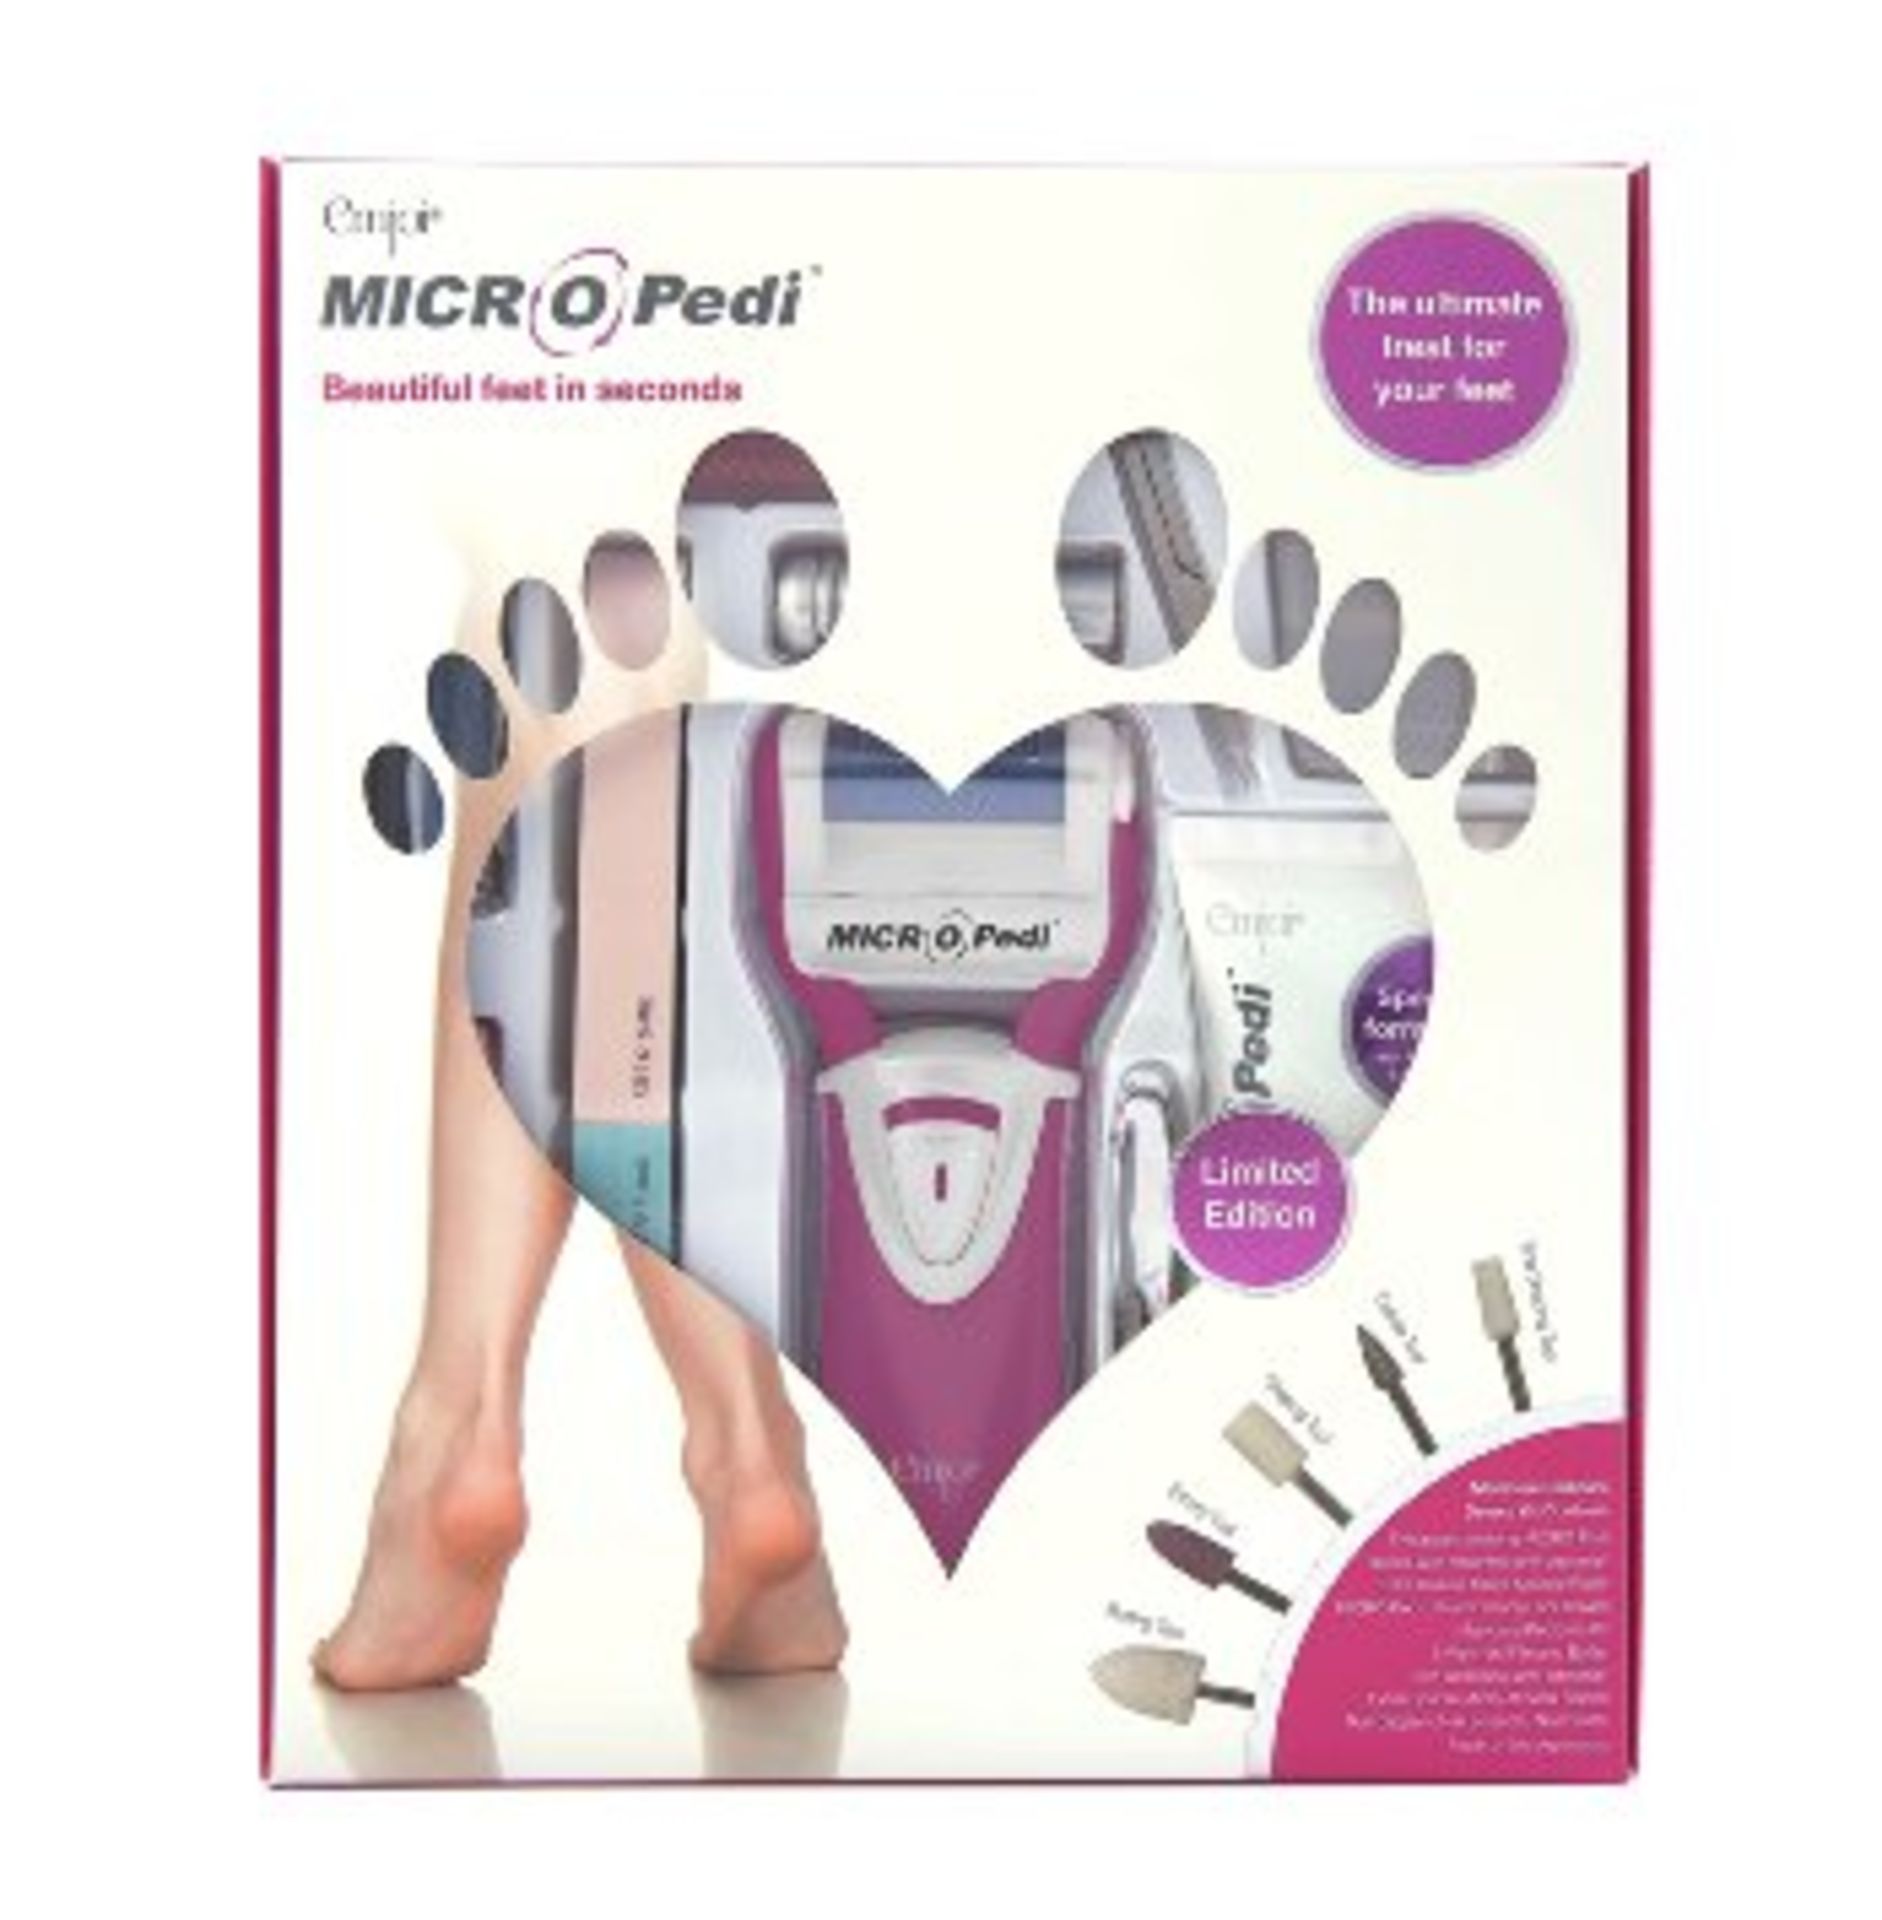 BEAUTY & PAMPERING PRODUCTS - 33 Units - AMAZON Price £540